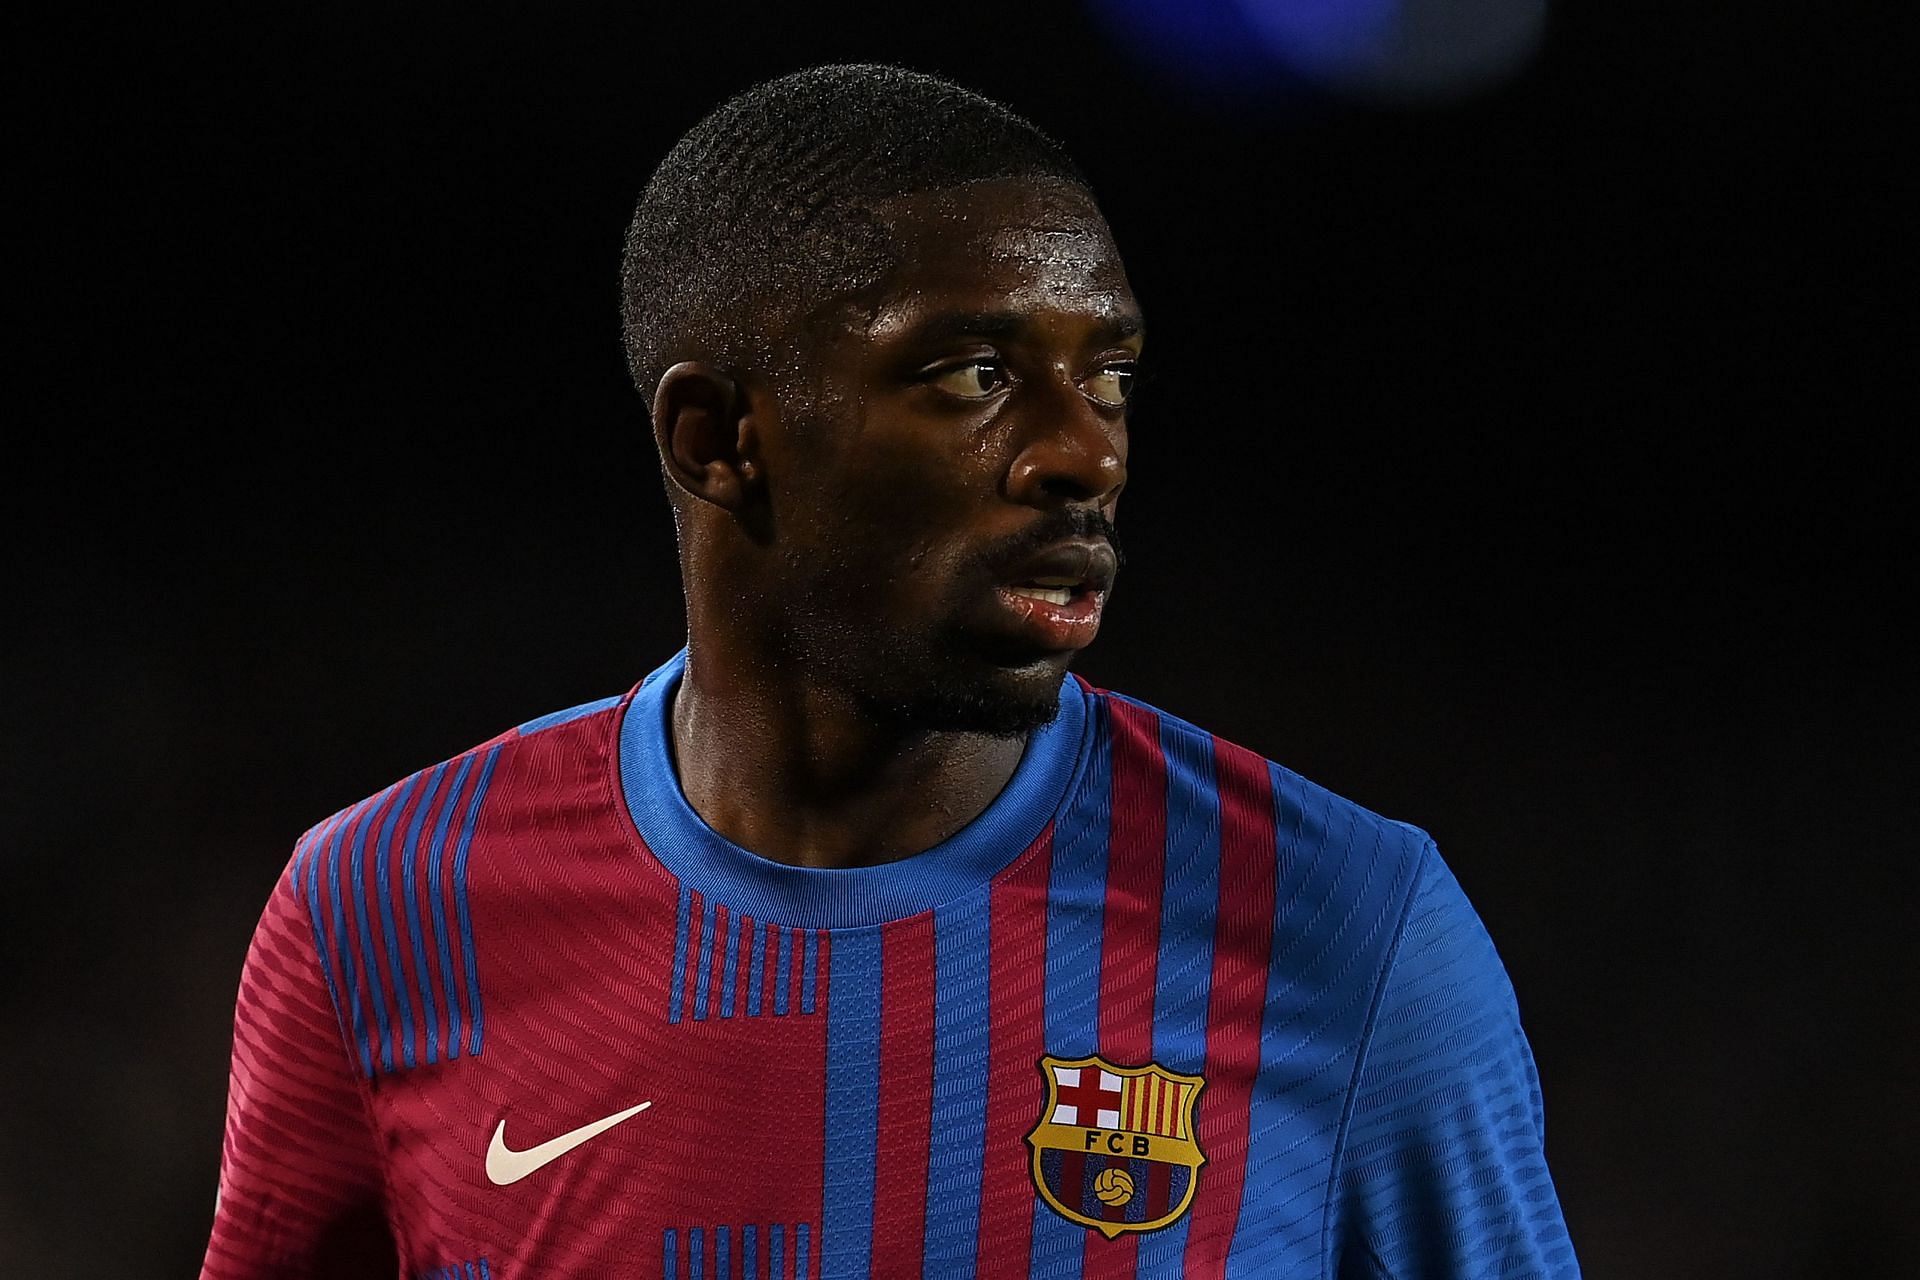 Dembele looks set to depart the Camp Nou this summer.